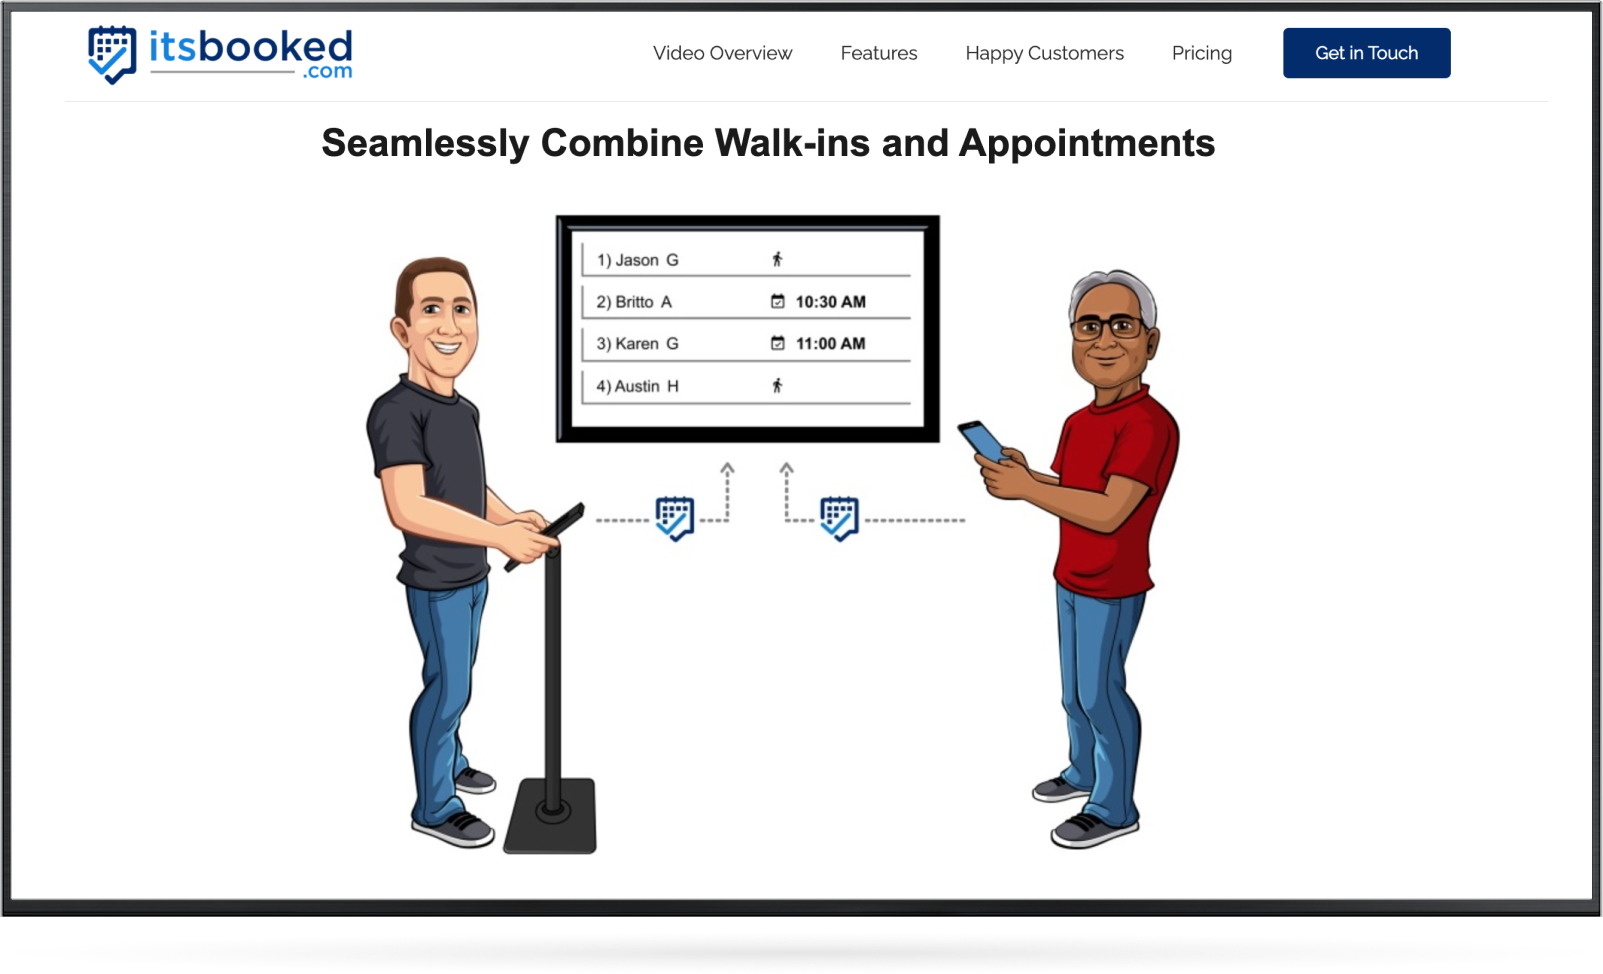 Itsbooked TV - Easily Combine Walk-ins and Appointments